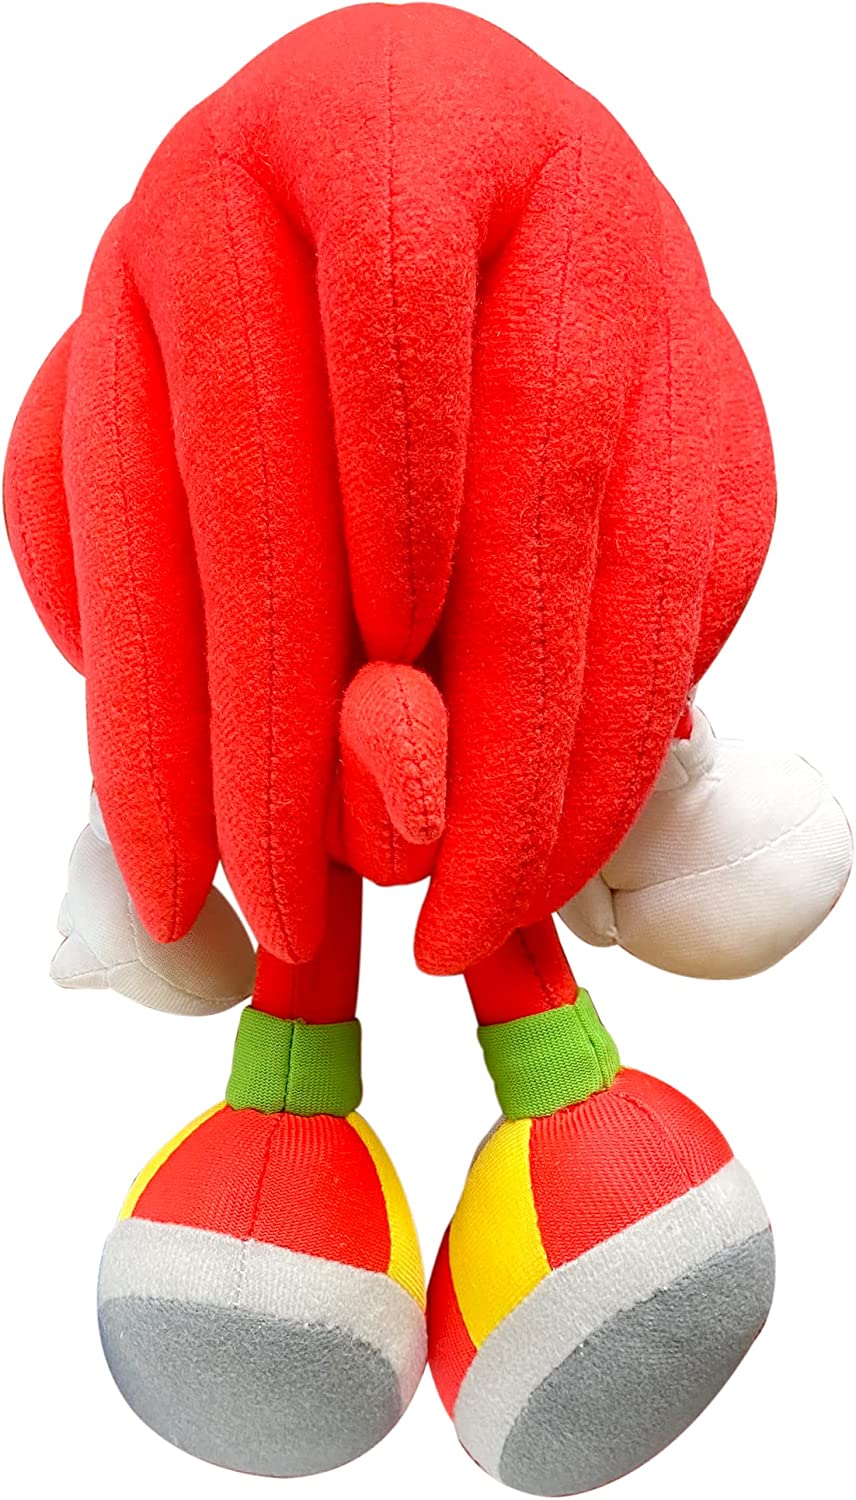 Sonic The Hedgehog Classic Knuckles 9" Plush Great Eastern Entertainment